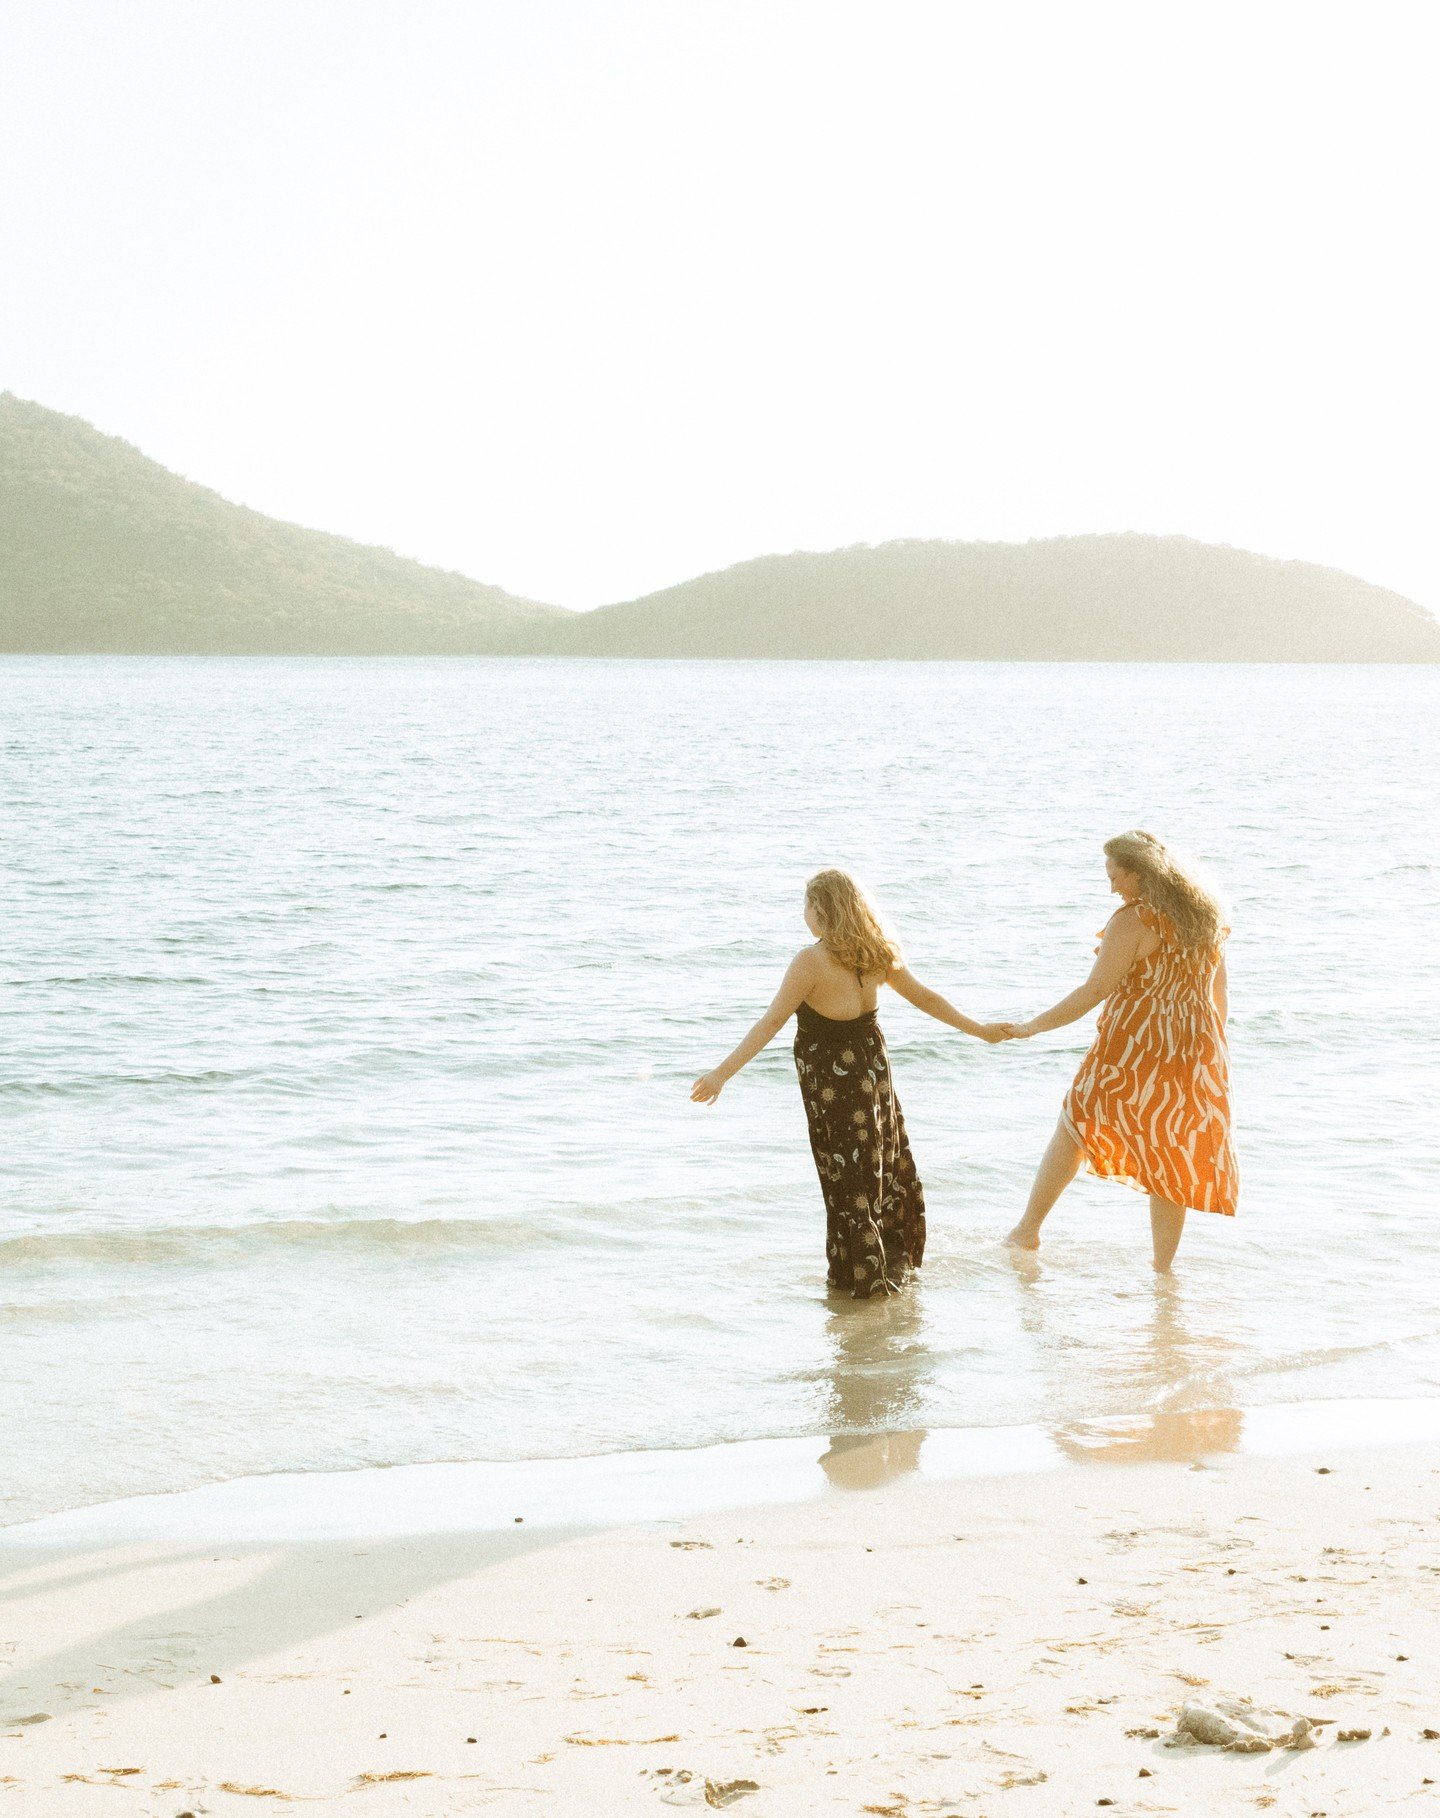 In early April, I went on a vacation to Culebra, PR with my partner. I had the opportunity to photograph many families &amp; couples who either lived on the island or were just visiting. ☀️

First we have Beth &amp; Lily from Virginia. Beth reached o